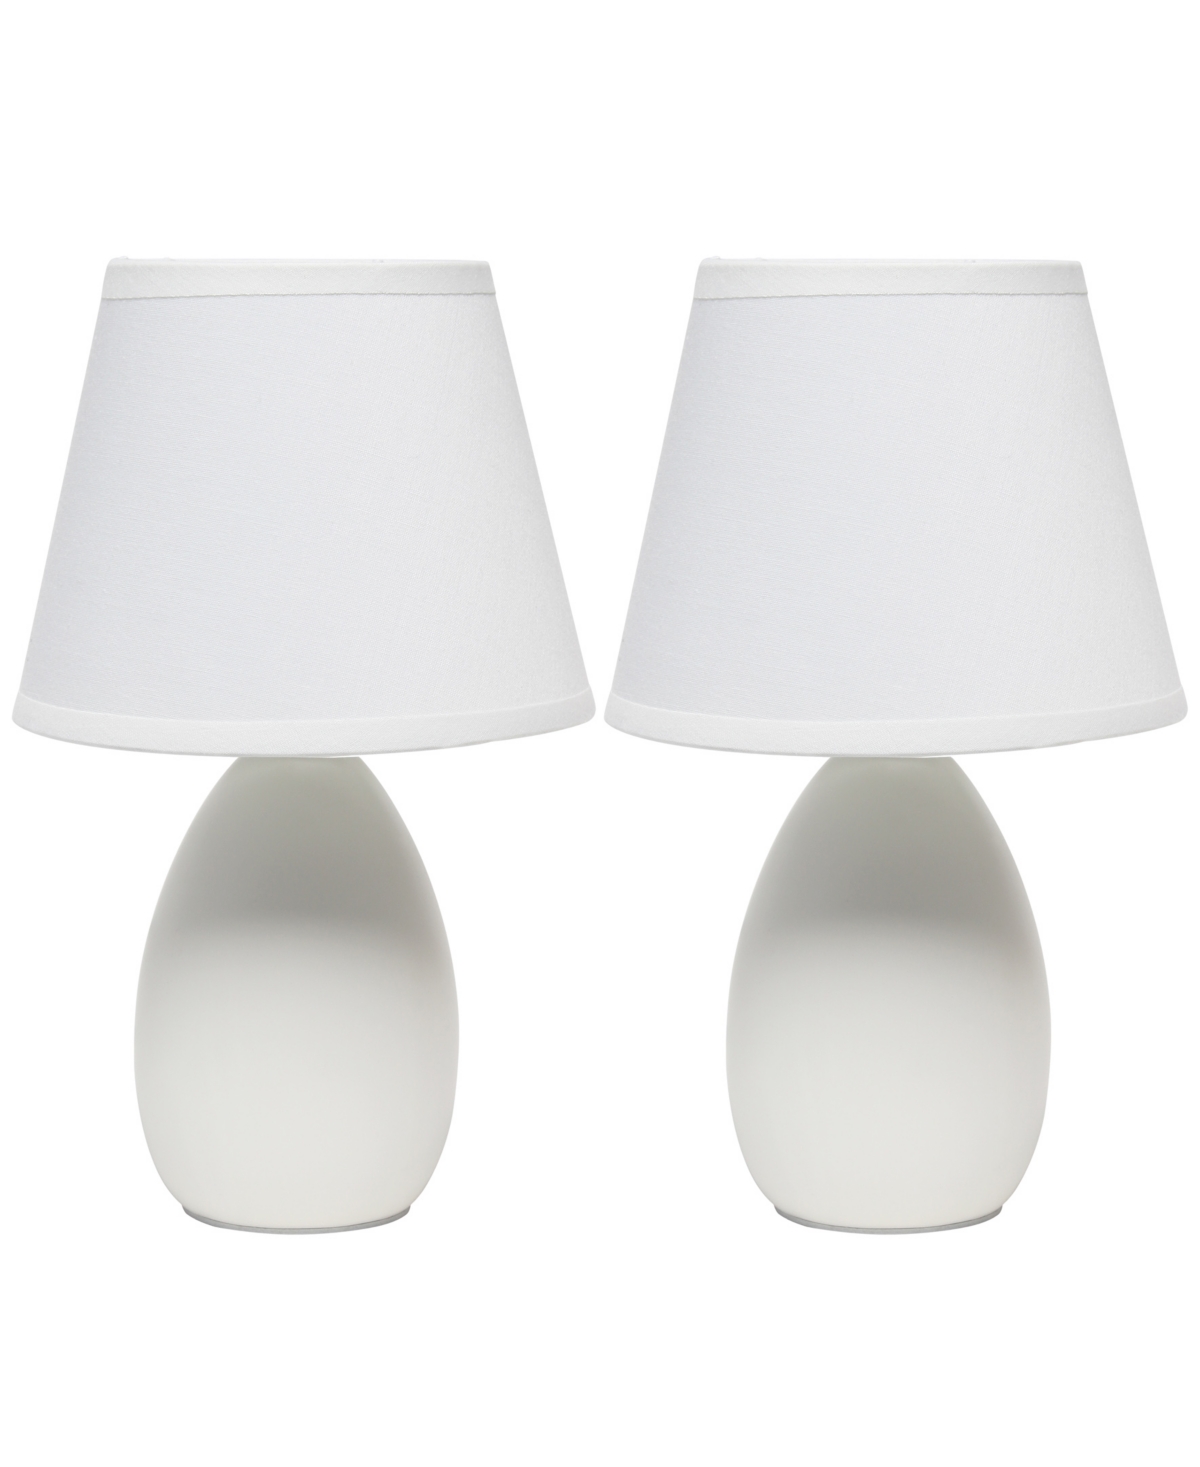 Shop Creekwood Home Nauru 9.45" Traditional Petite Ceramic Oblong Bedside Table Desk Lamp Two Pack Set, Tapered Drum Fab In Off White